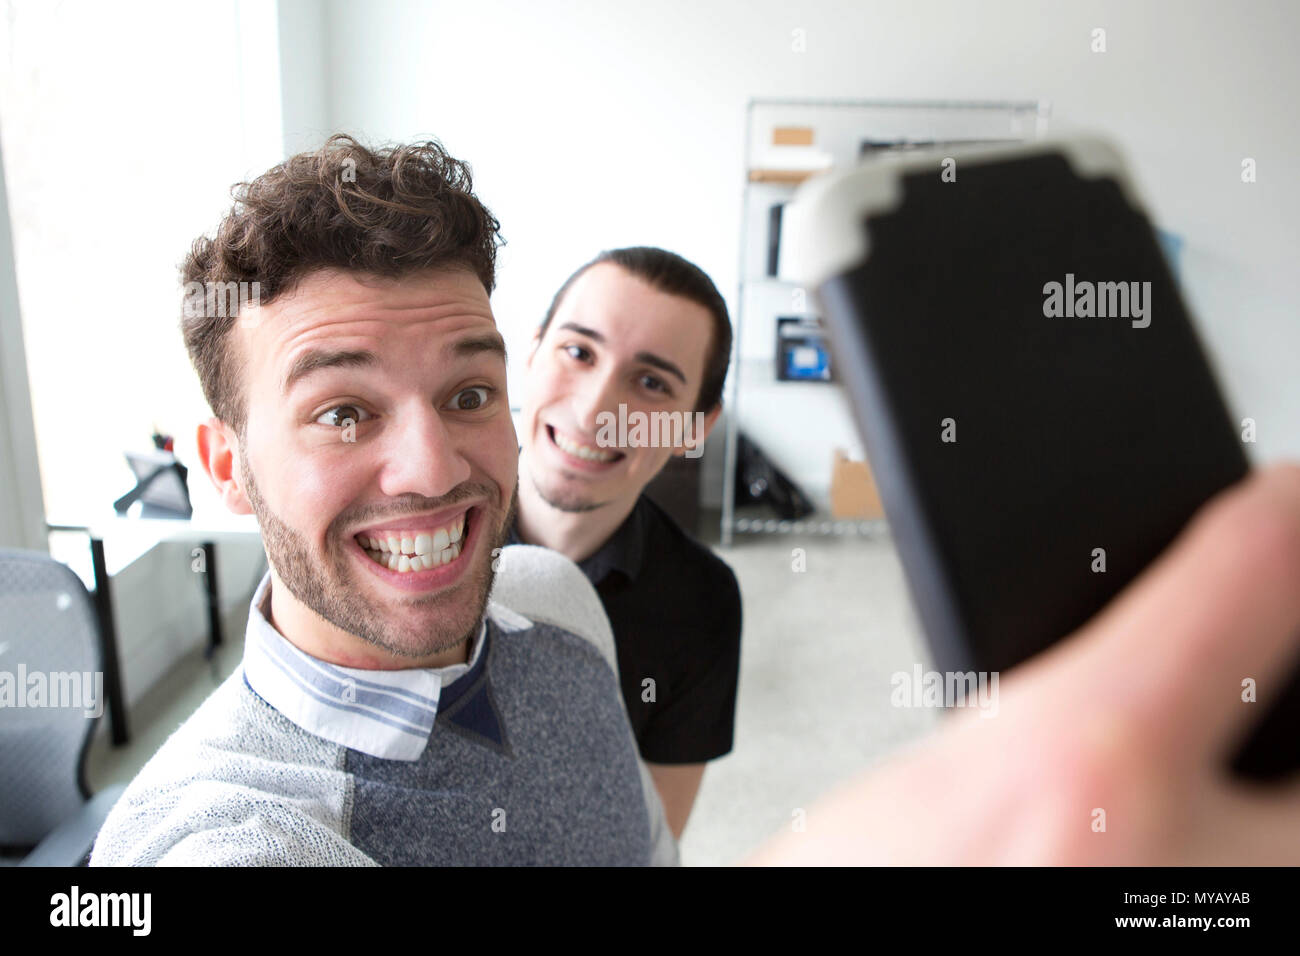 Two young businessmen make silly faces while taking selfies in a modern office. Stock Photo